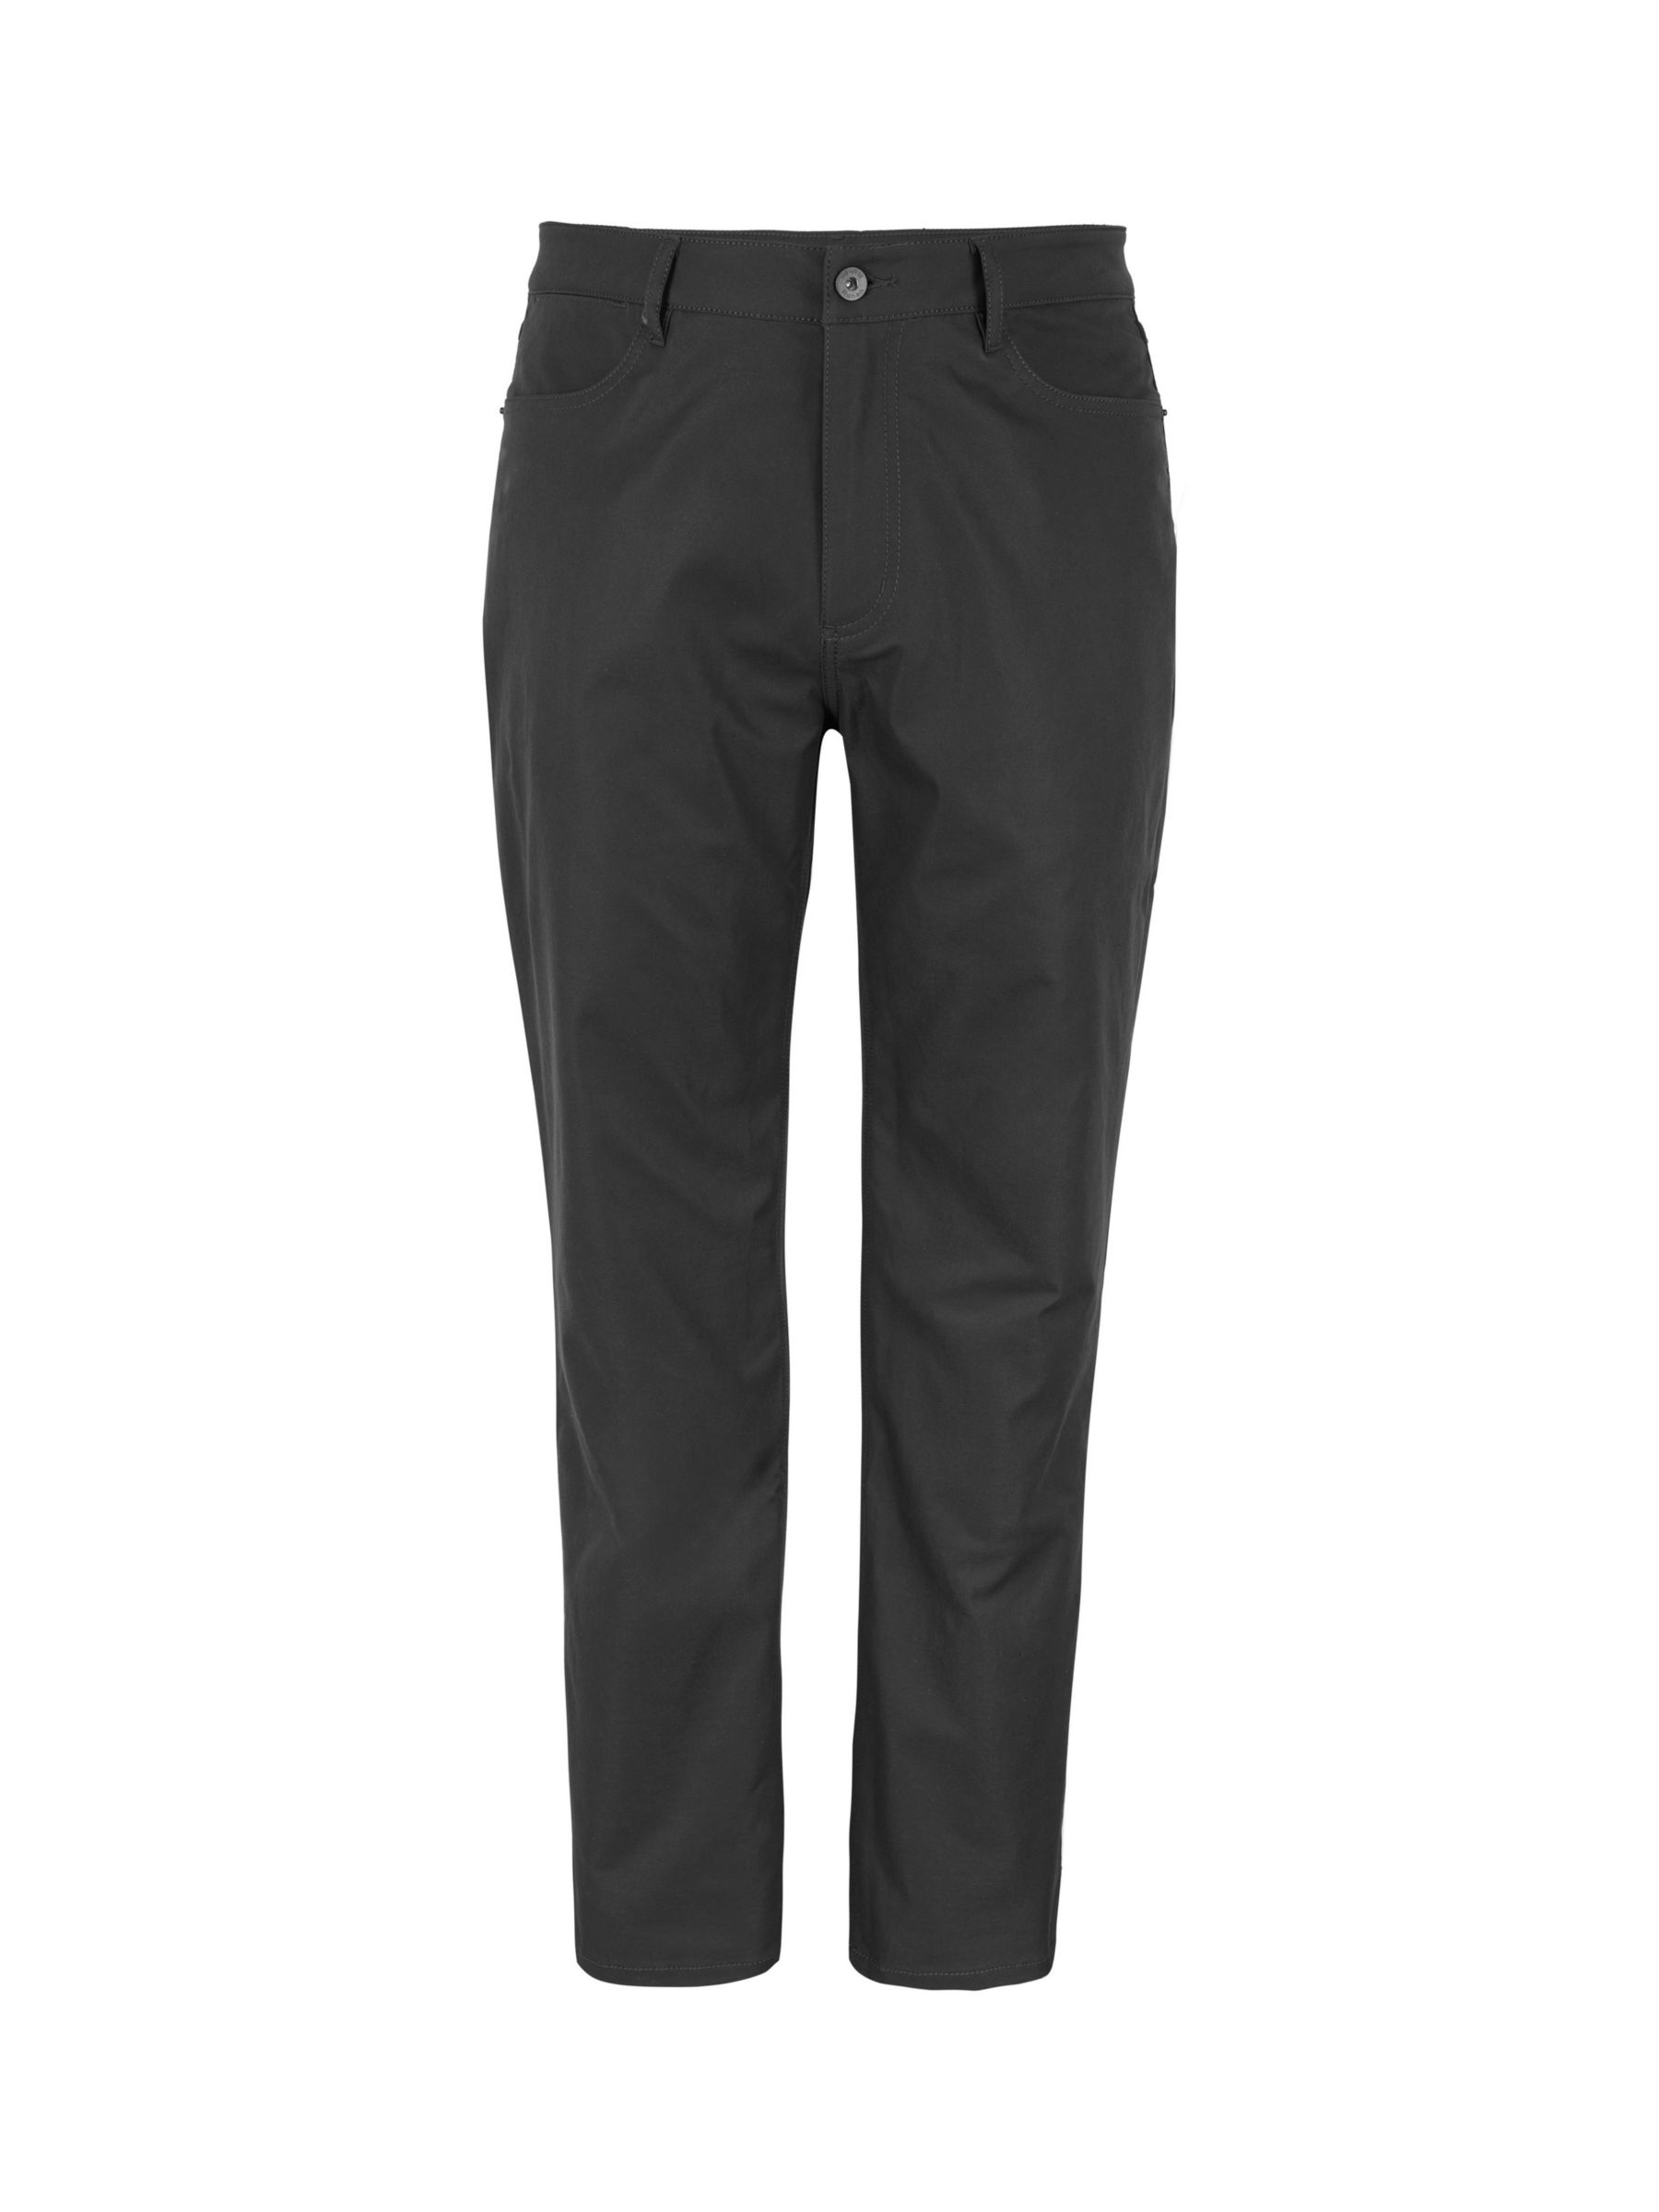 Buy Rohan District Smart Everyday Trousers Online at johnlewis.com